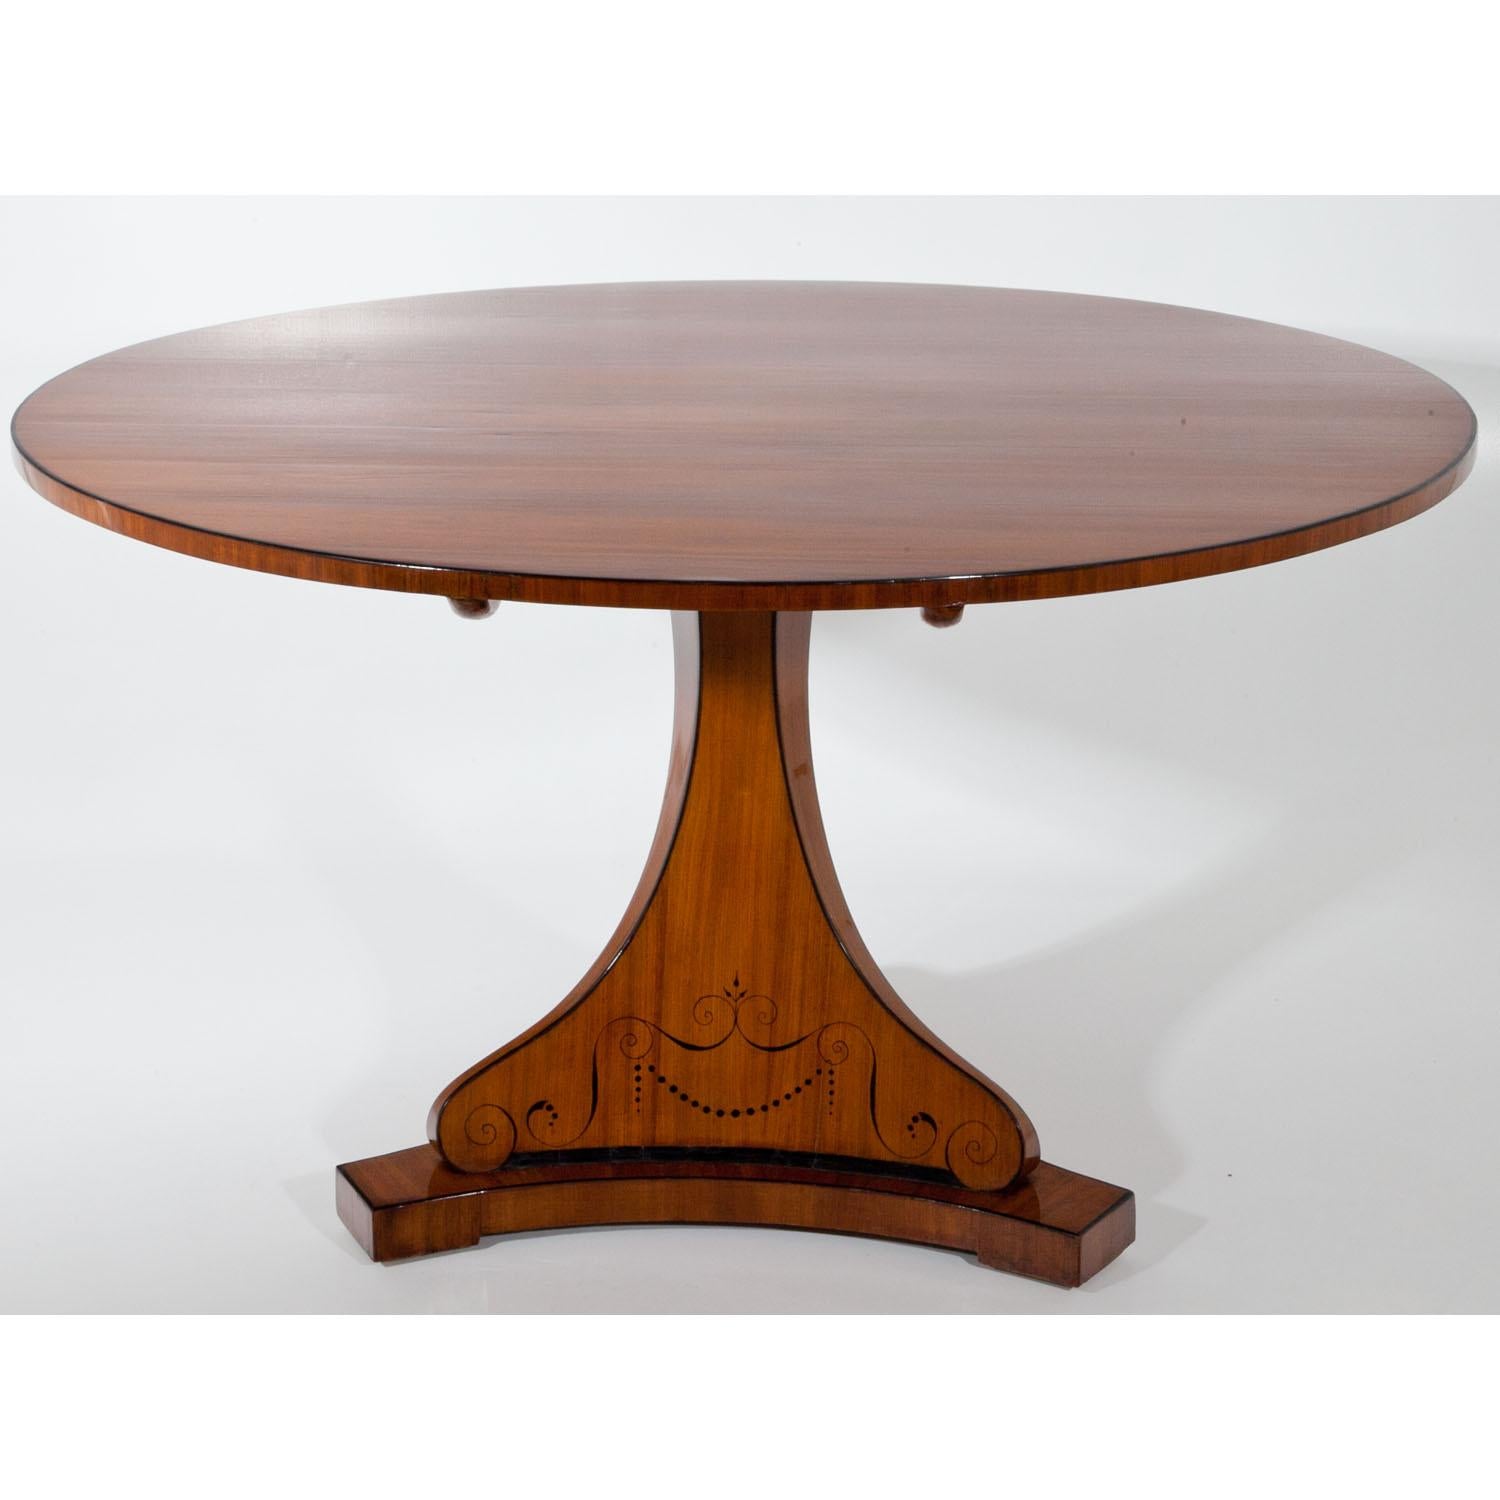 Large Biedermeier Salon table in the style of Dannhauser out of light mahogany. The table has a foldable top, stands on a trefoil base and is decorated with volutes.